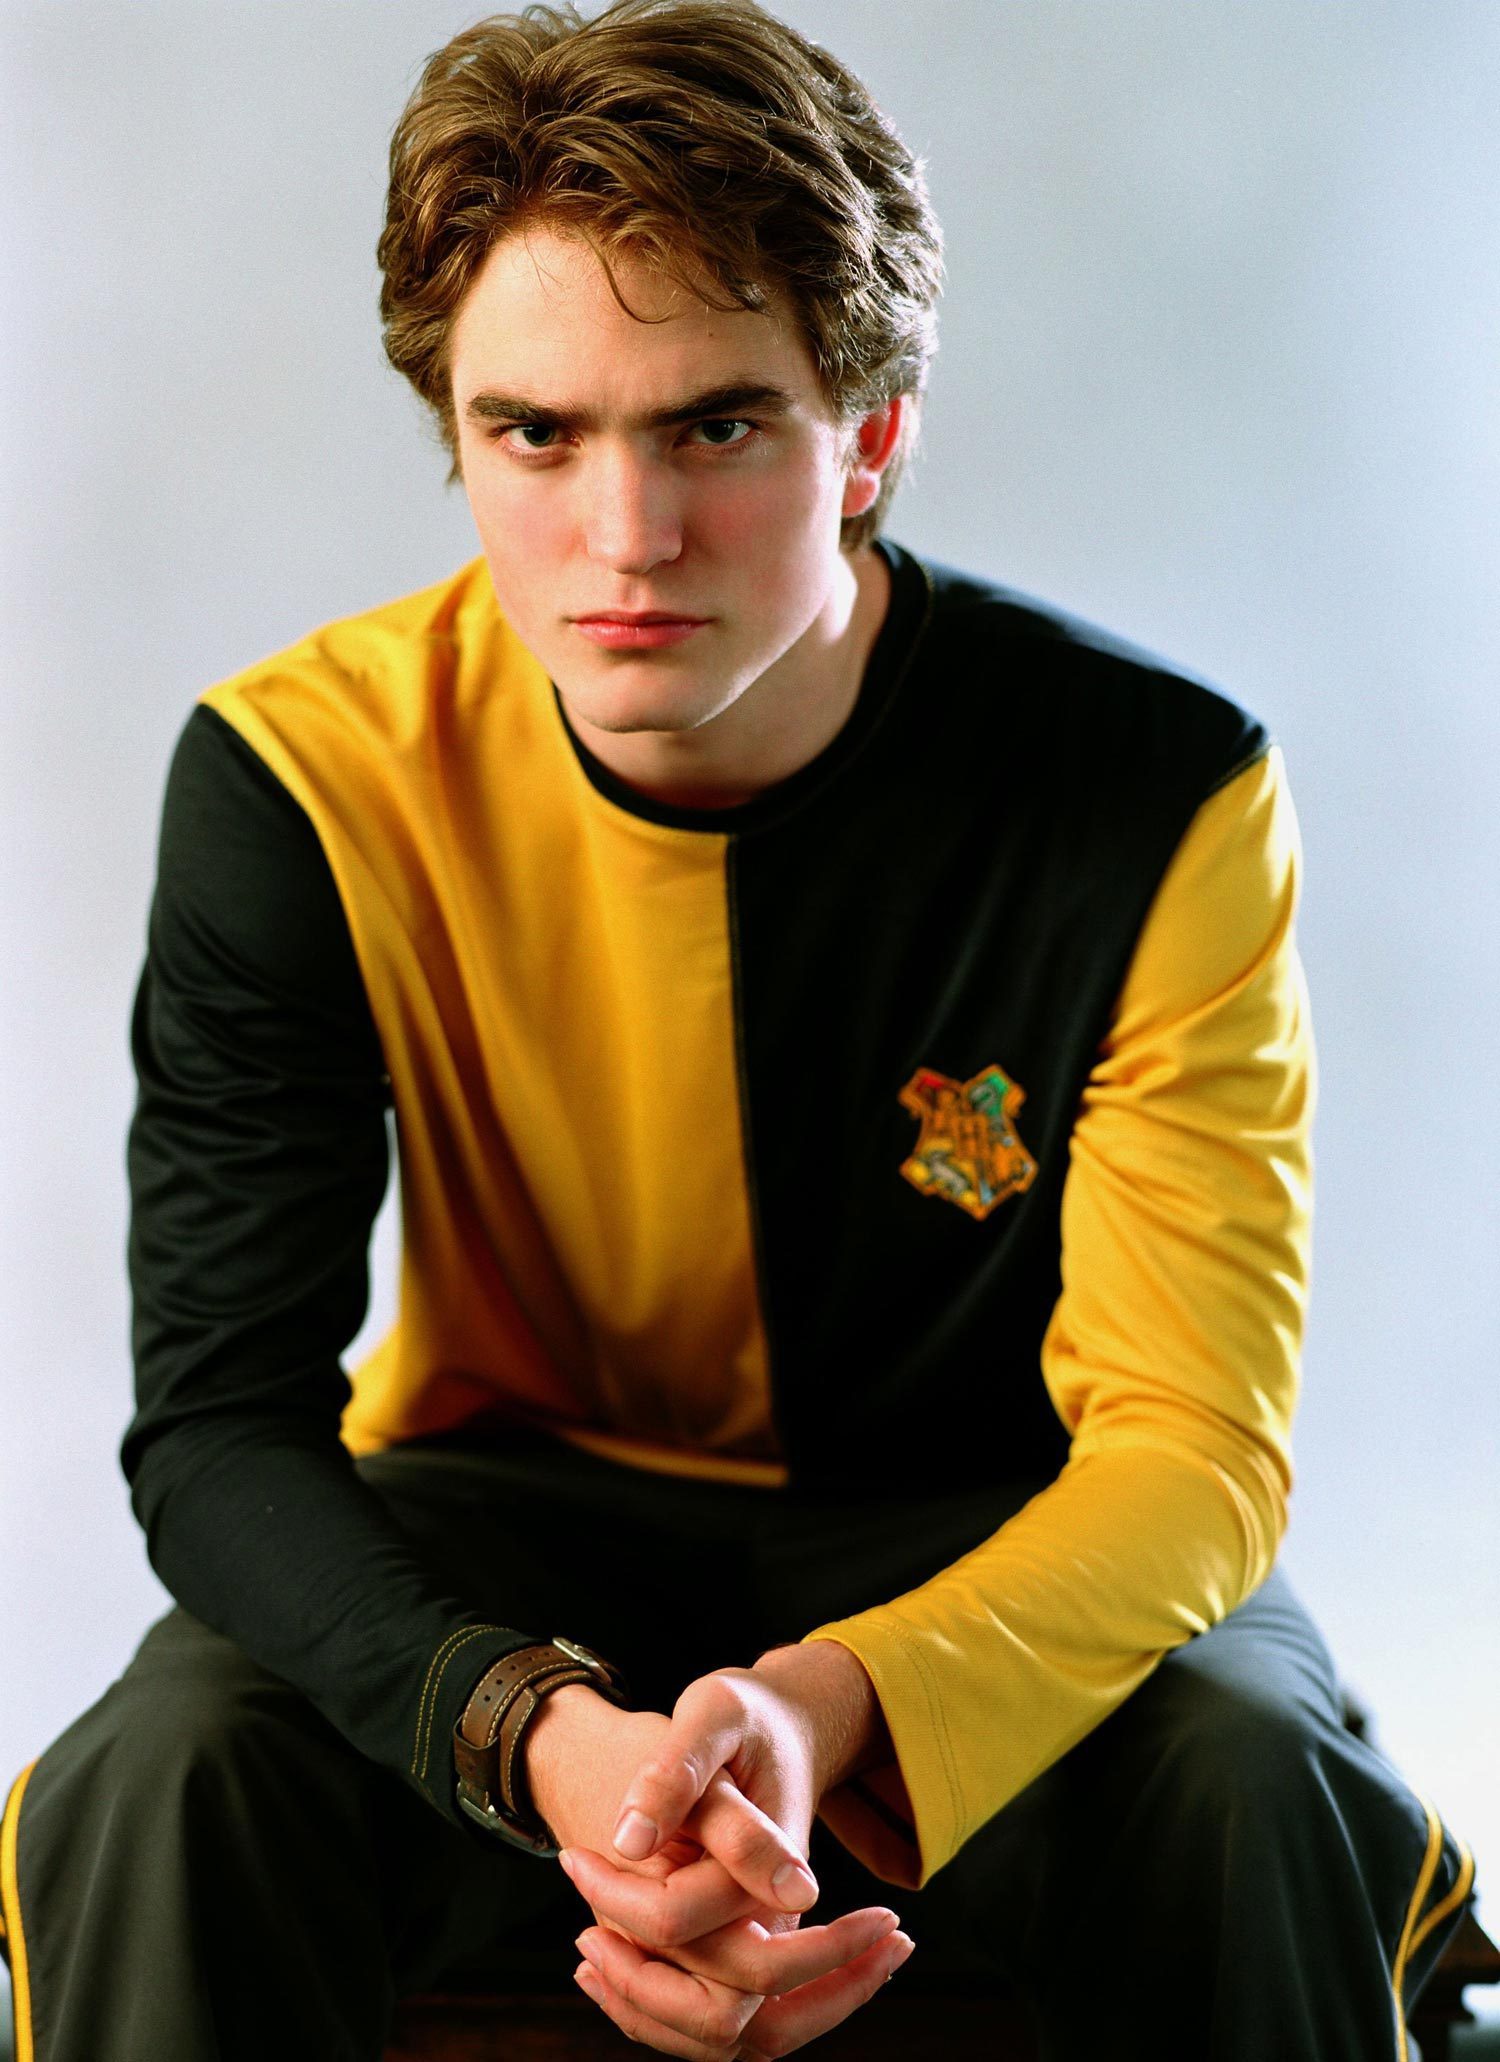 http://images2.fanpop.com/images/photos/2600000/Cedric-harry-potter-and-the-goblet-of-fire-2695228-1500-2062.jpg